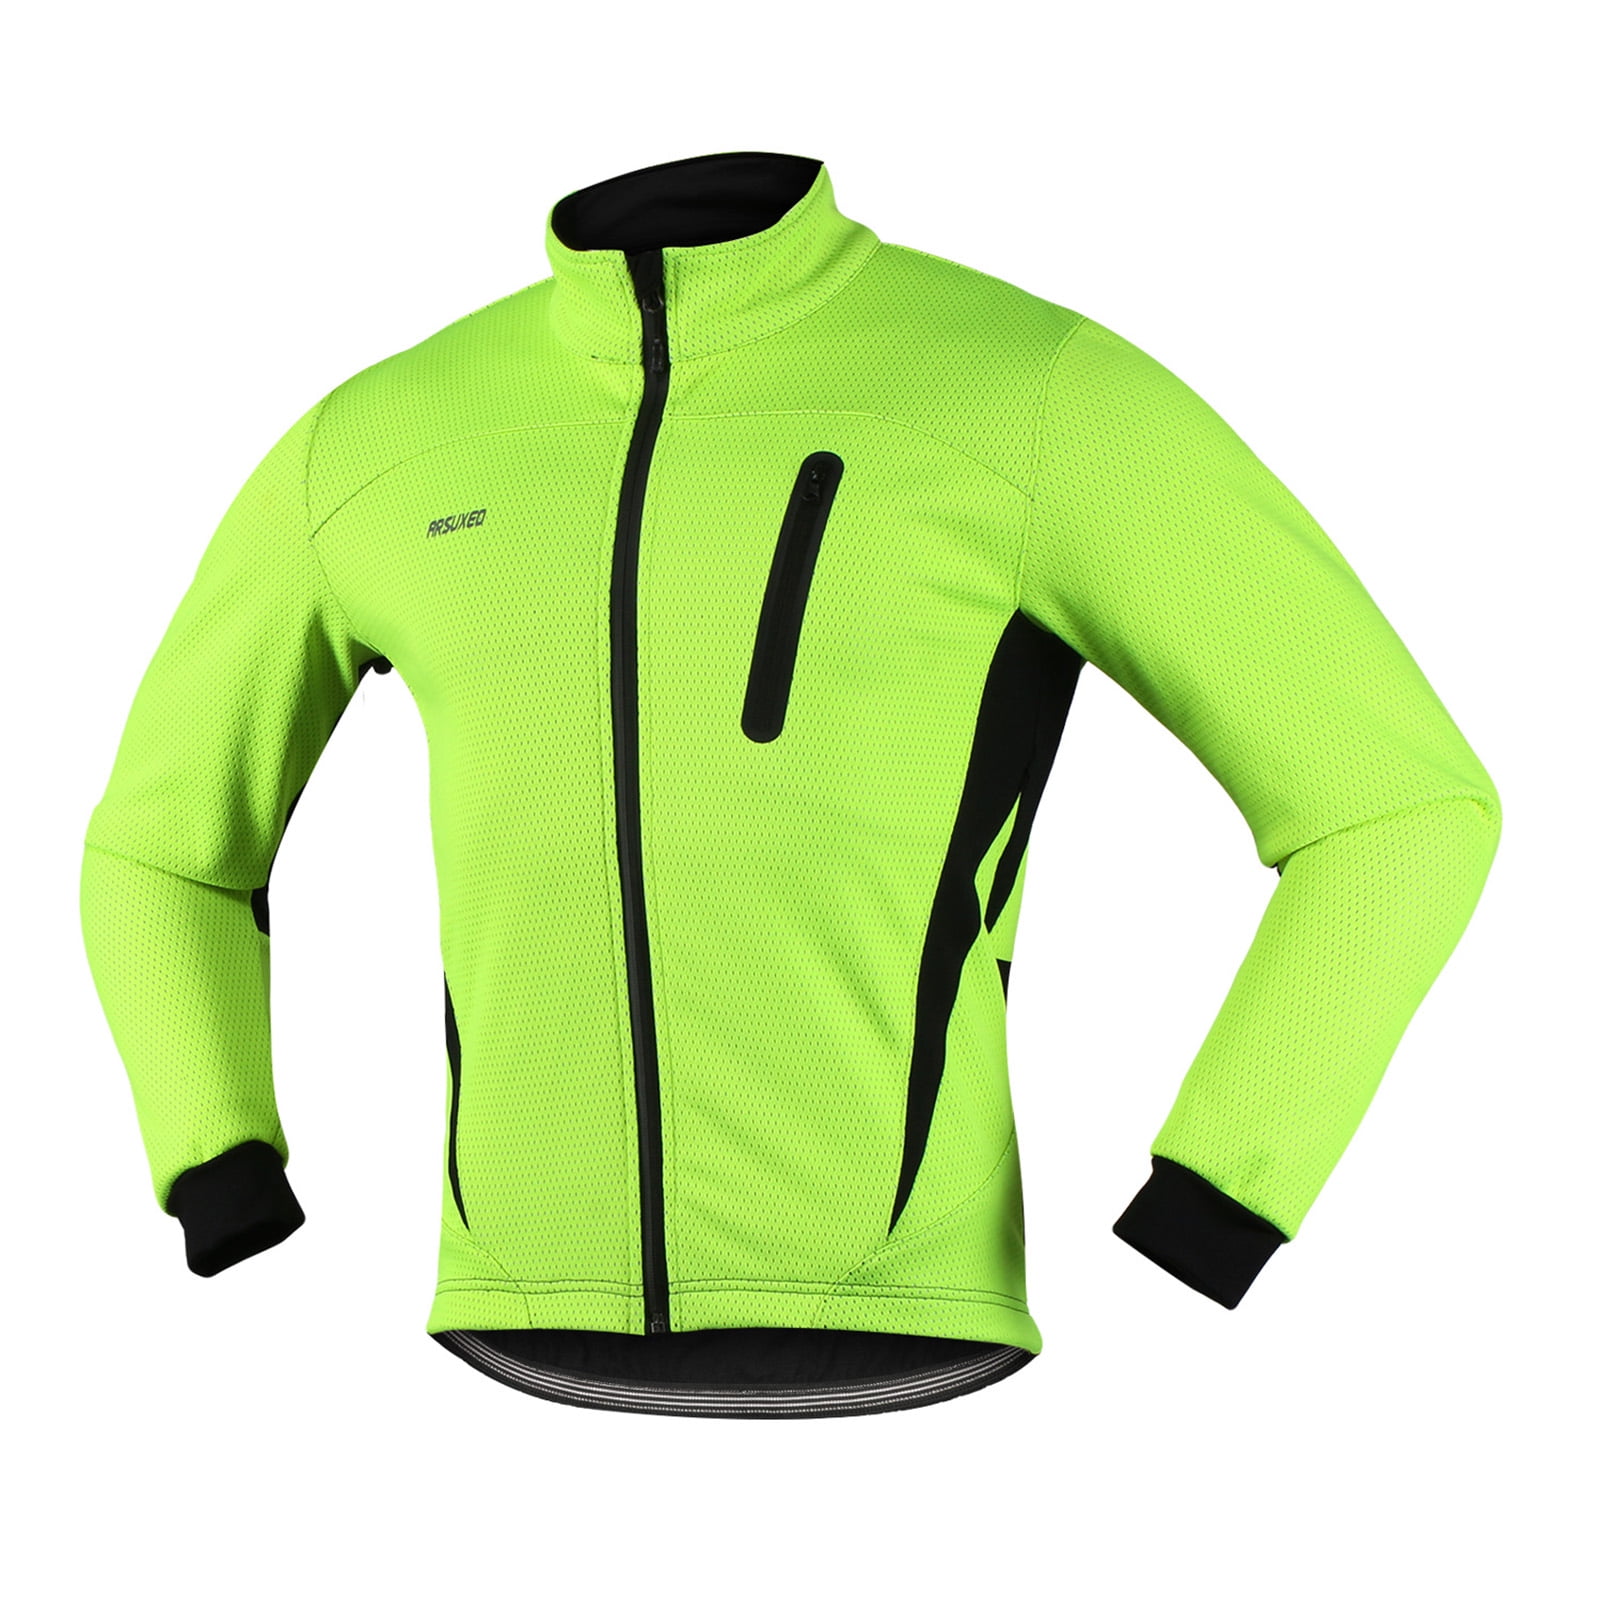 Arsuxeo Cycling Hooded Jacket High Visibility Windproof Running Top Winter Coat